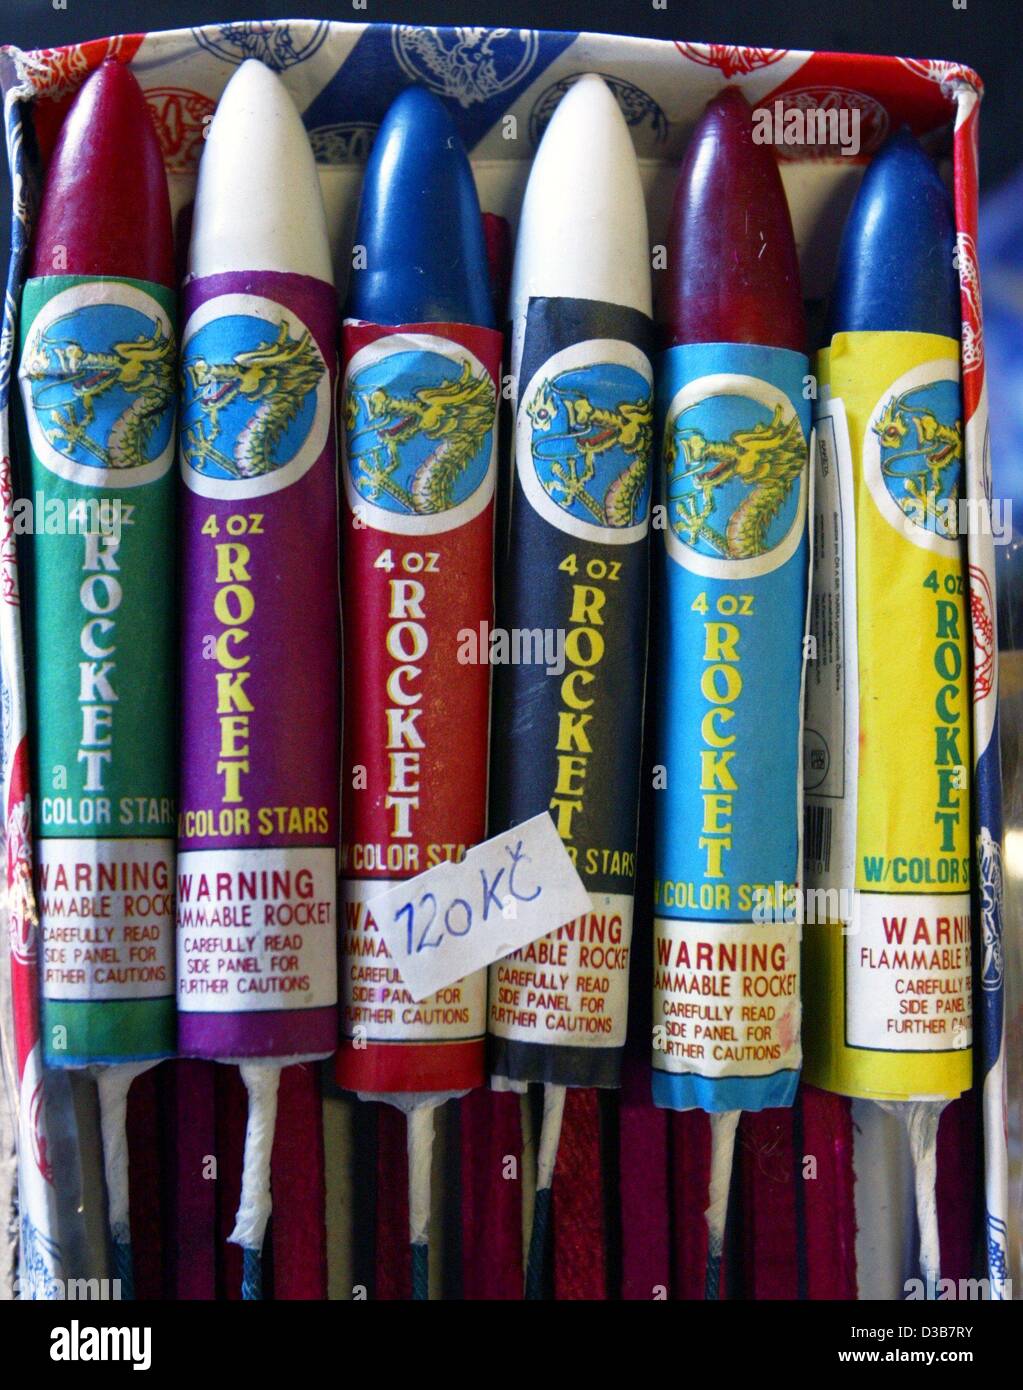 (dpa) - Firecrackers are for sale at a market in Bozi Dar, Czechia, 13 December 2002. The import of fireworks and pyrotechnics from Poland and Czechia to Germany is illegal, as they do not comply with German laws on explosives. Stock Photo